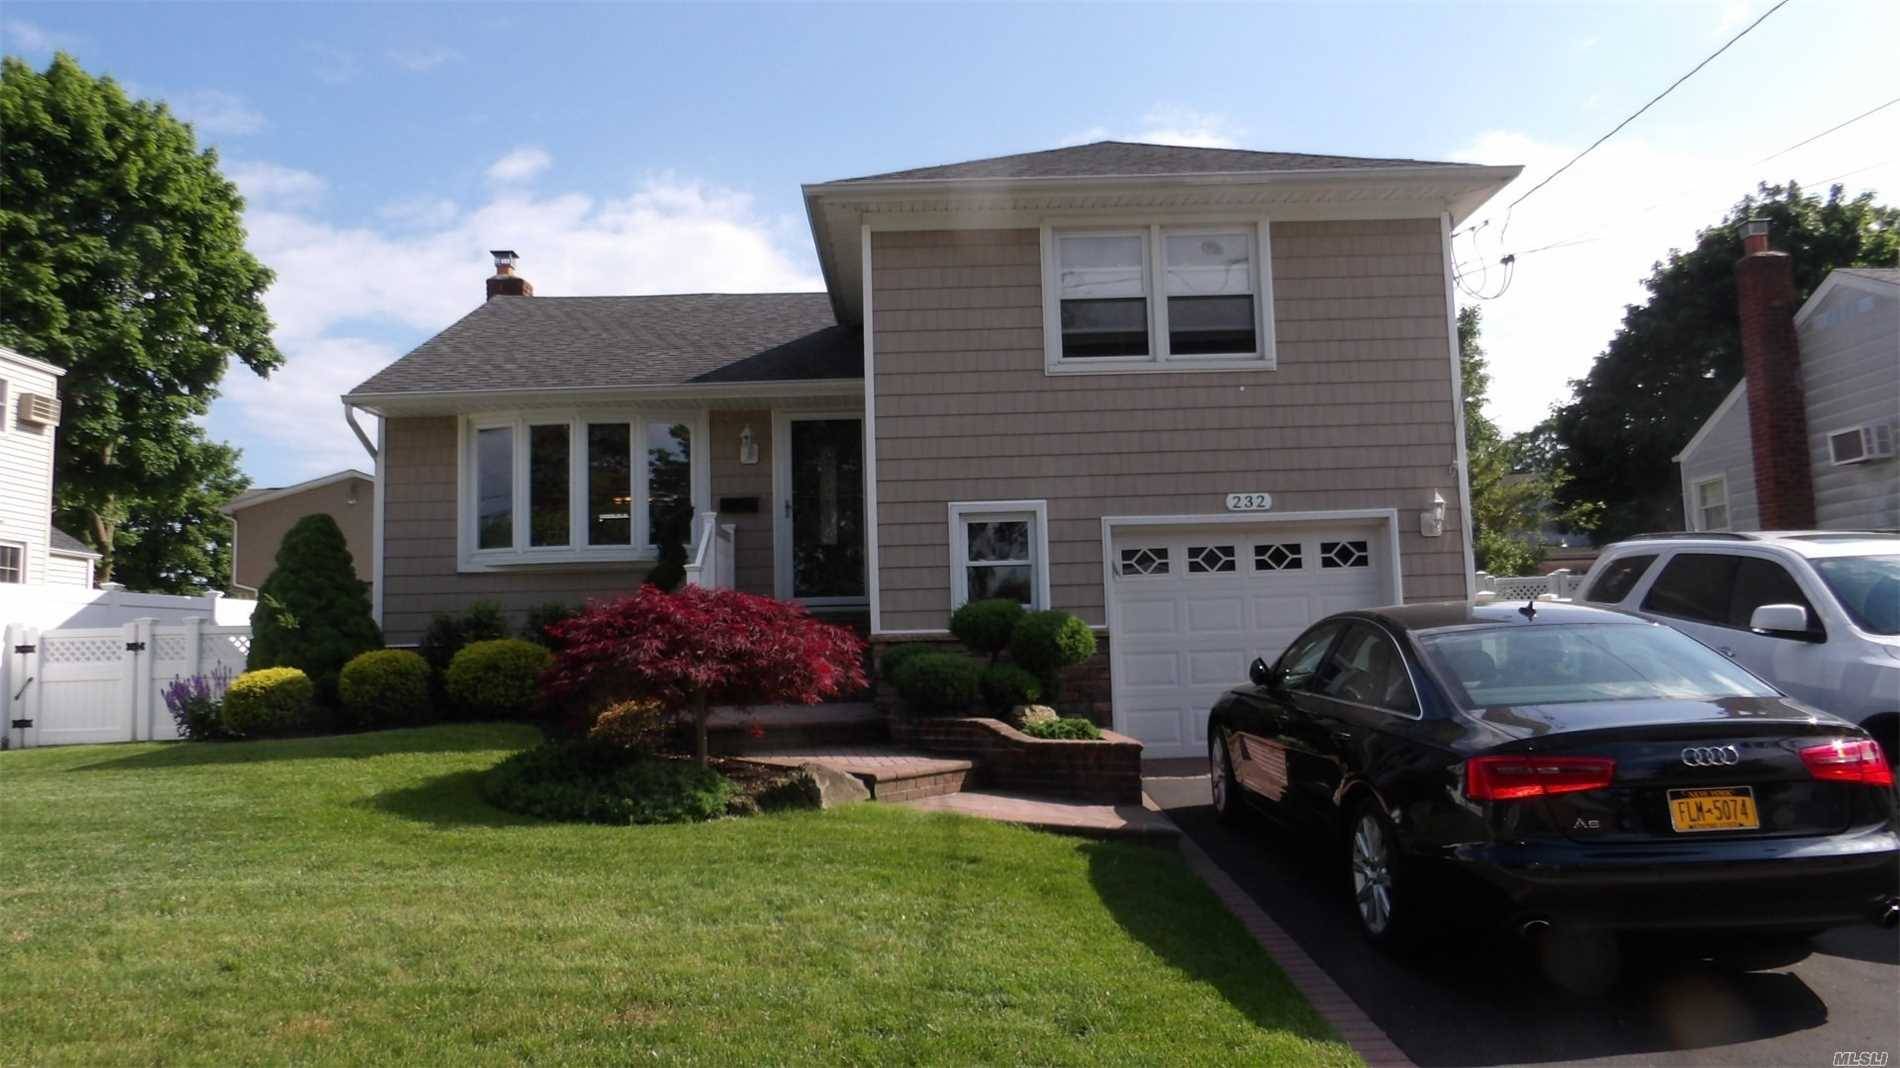 Updated Split In Massapequa Park With Resort Style Yard With In Ground Pool!!!!!